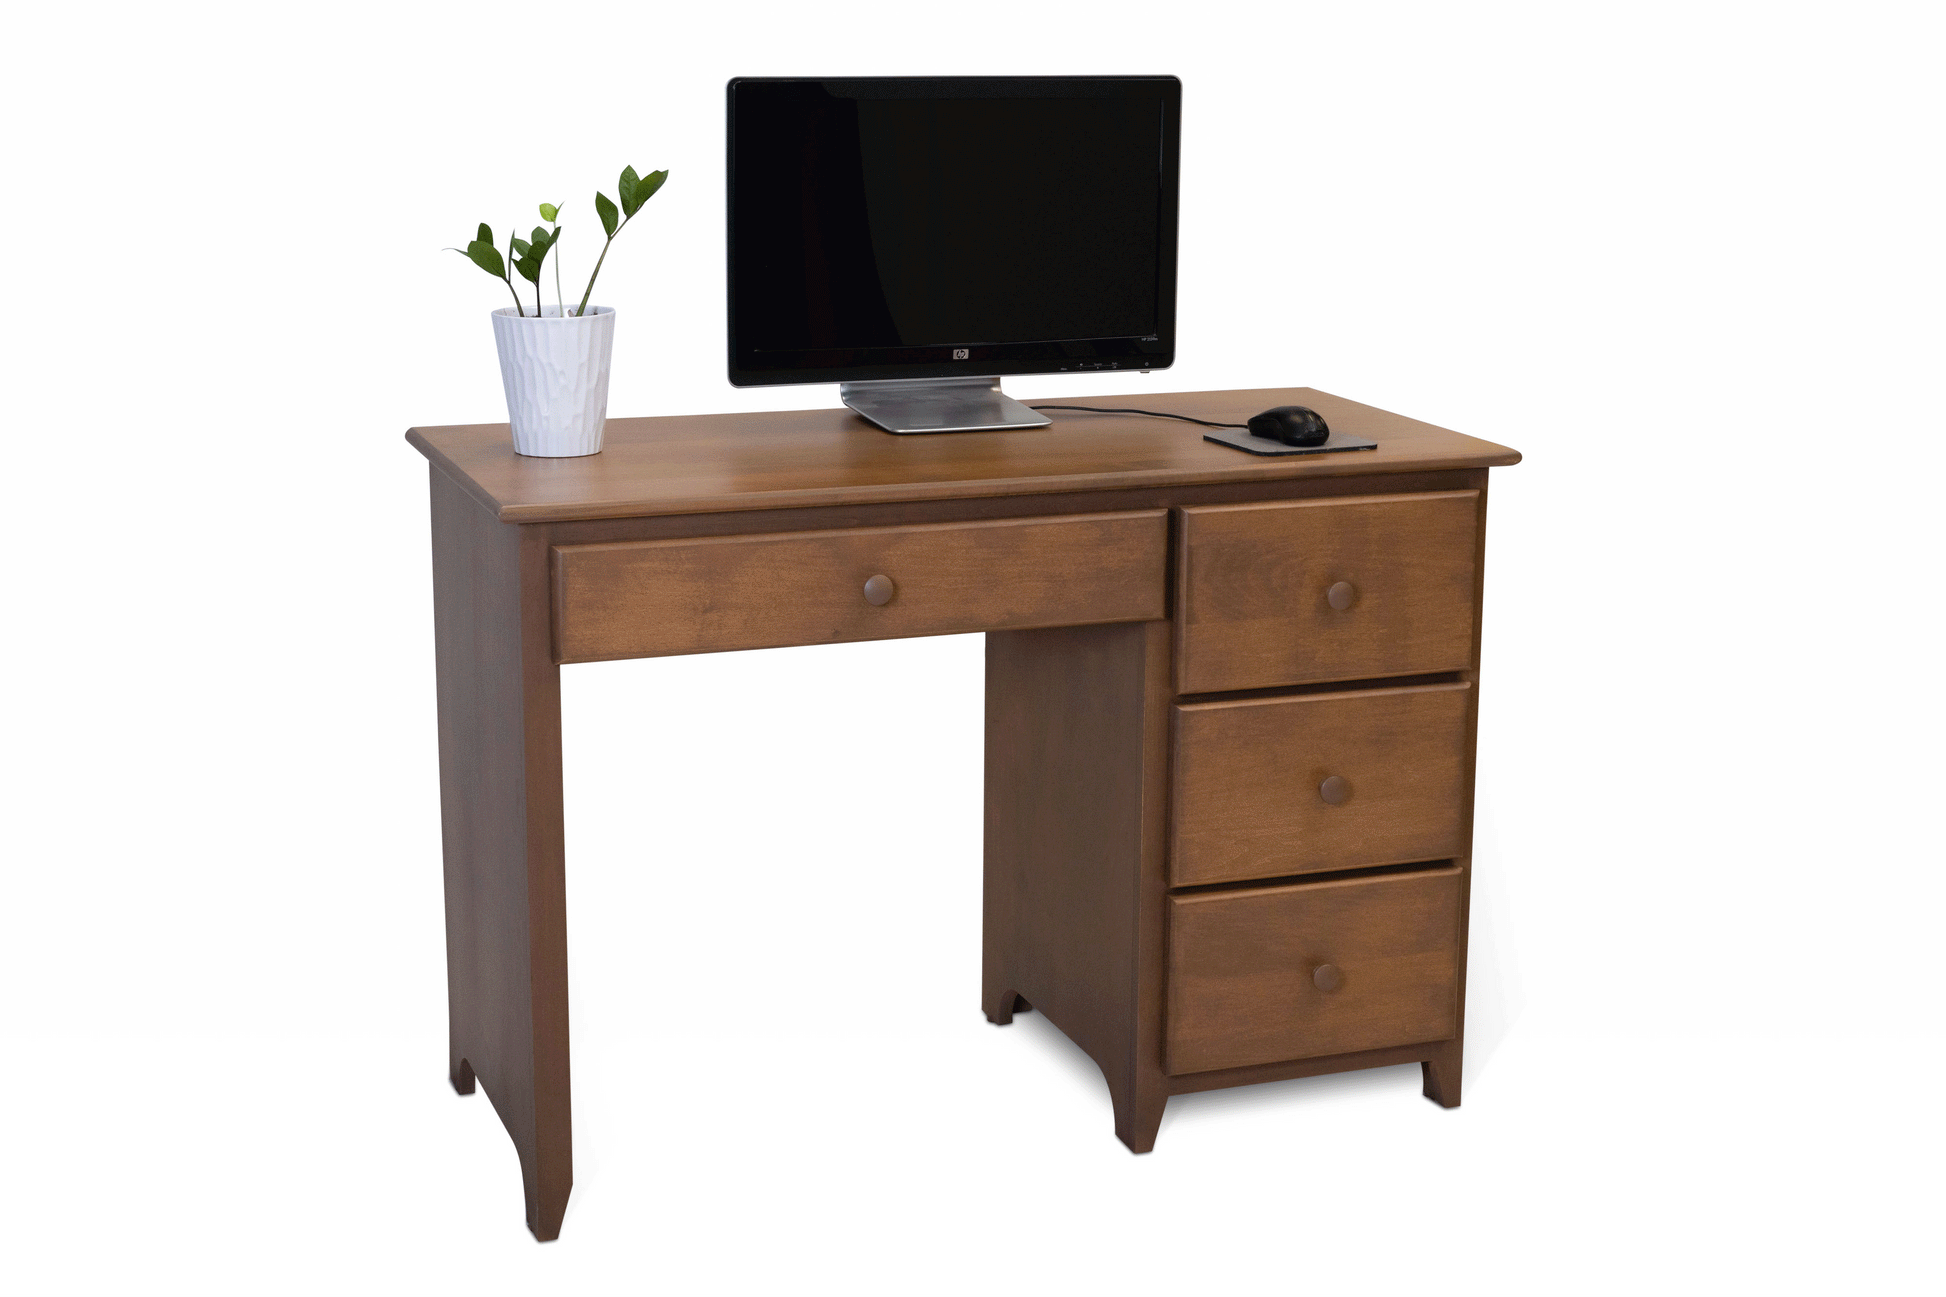 Acadia Shaker Student Desk shown with all drawers open to show the amount of storage space available.